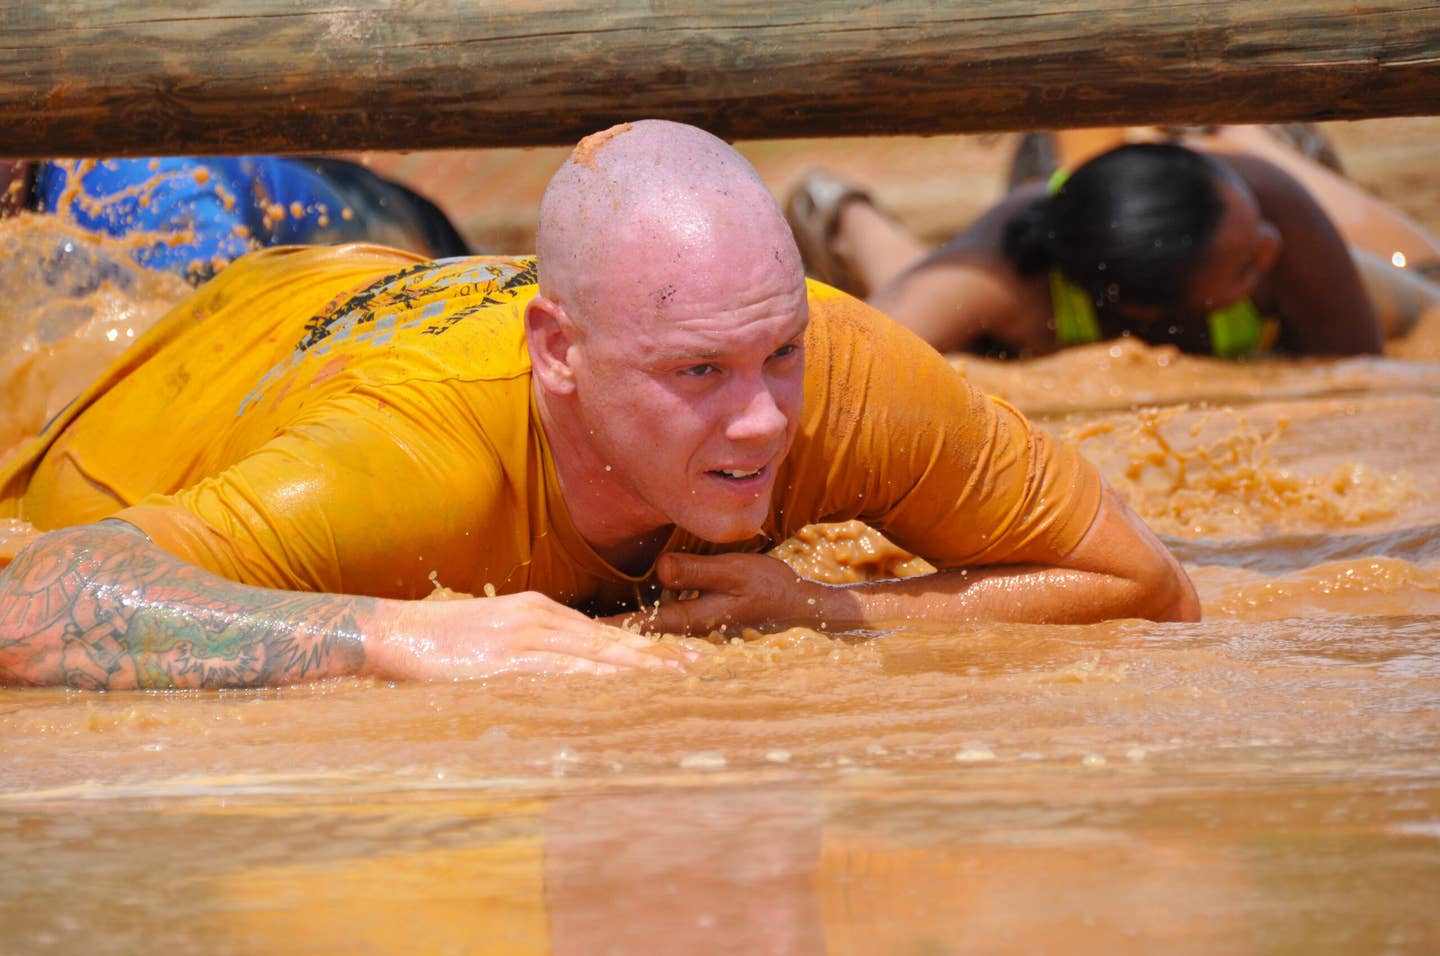 Sailor competes in the 6th annual Marine Mud Challenge at Fort Gordon.